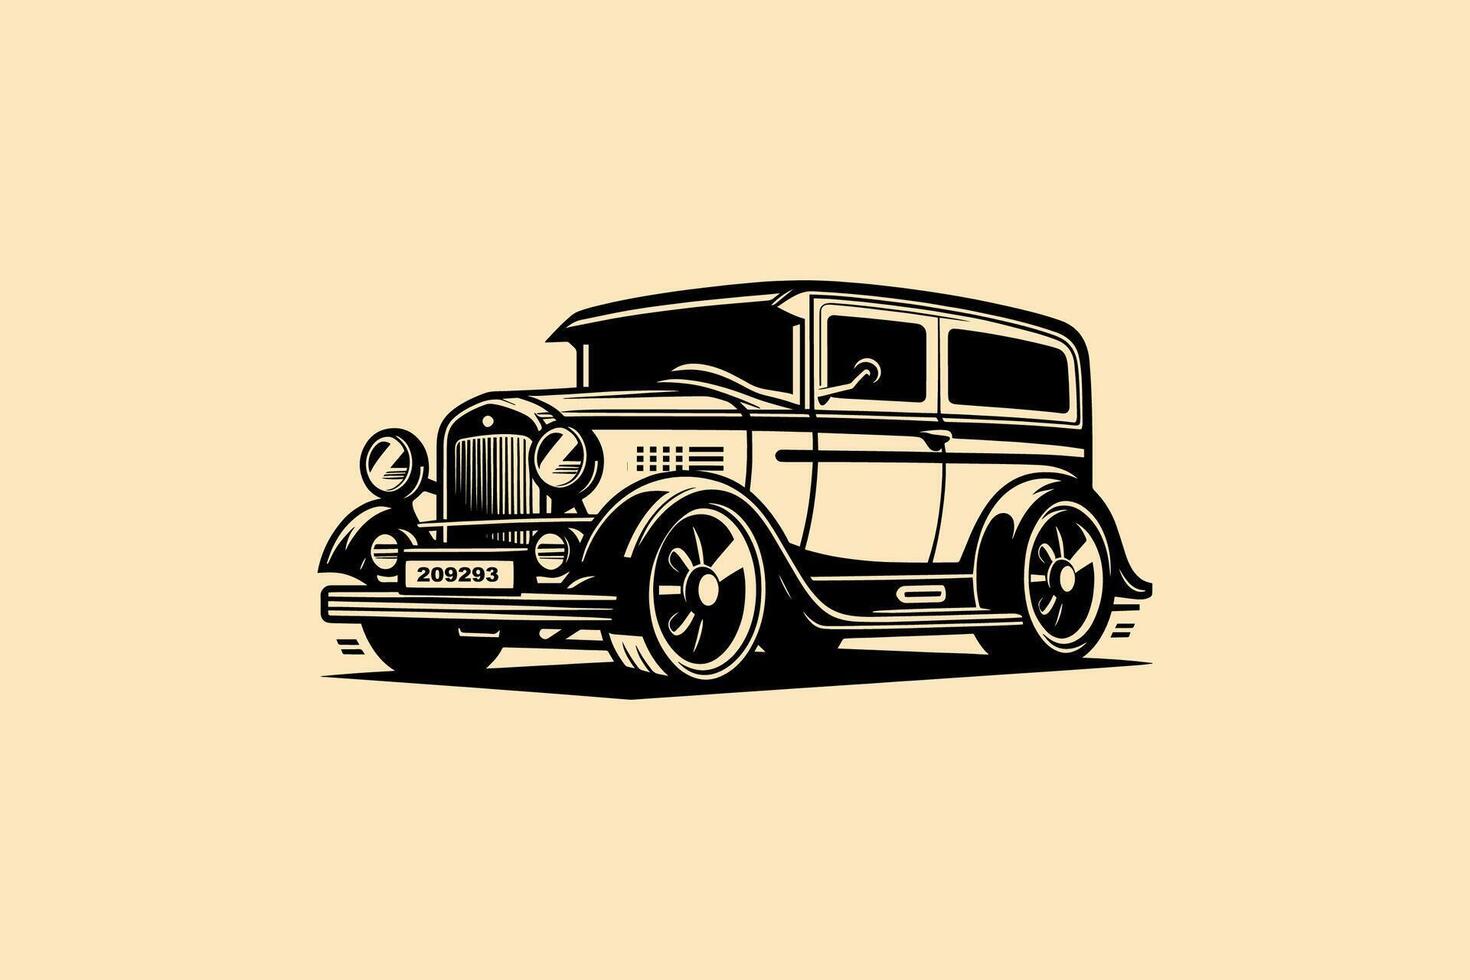 Vintage retro old or classic car illustration hand-drawn style vector